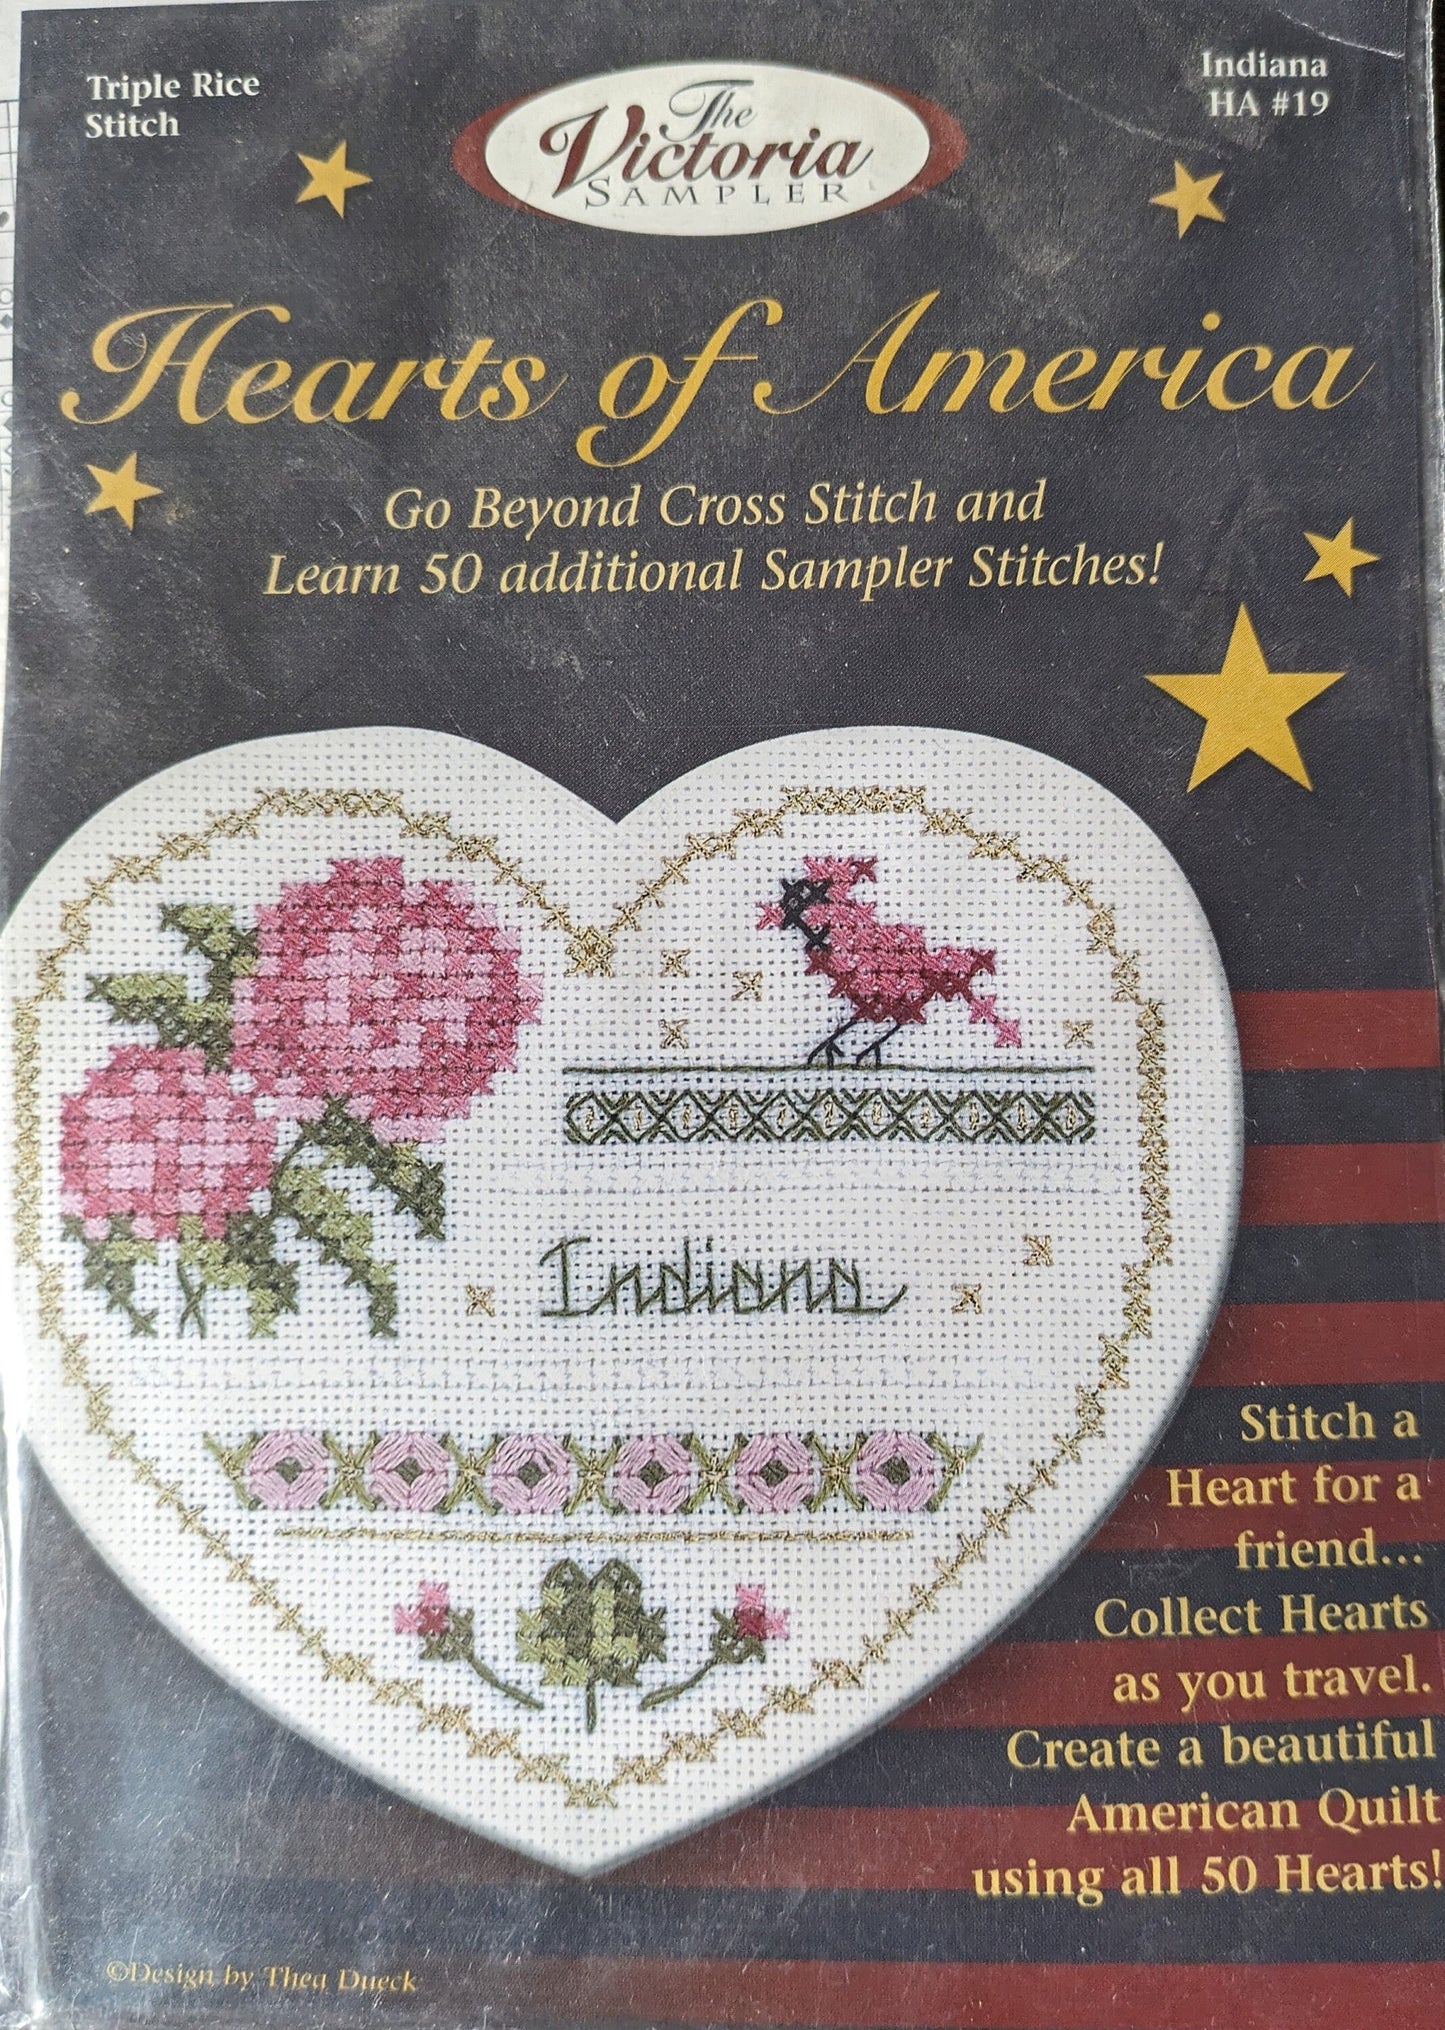 Hearts of America: Indiana Kit by The Victoria Samper